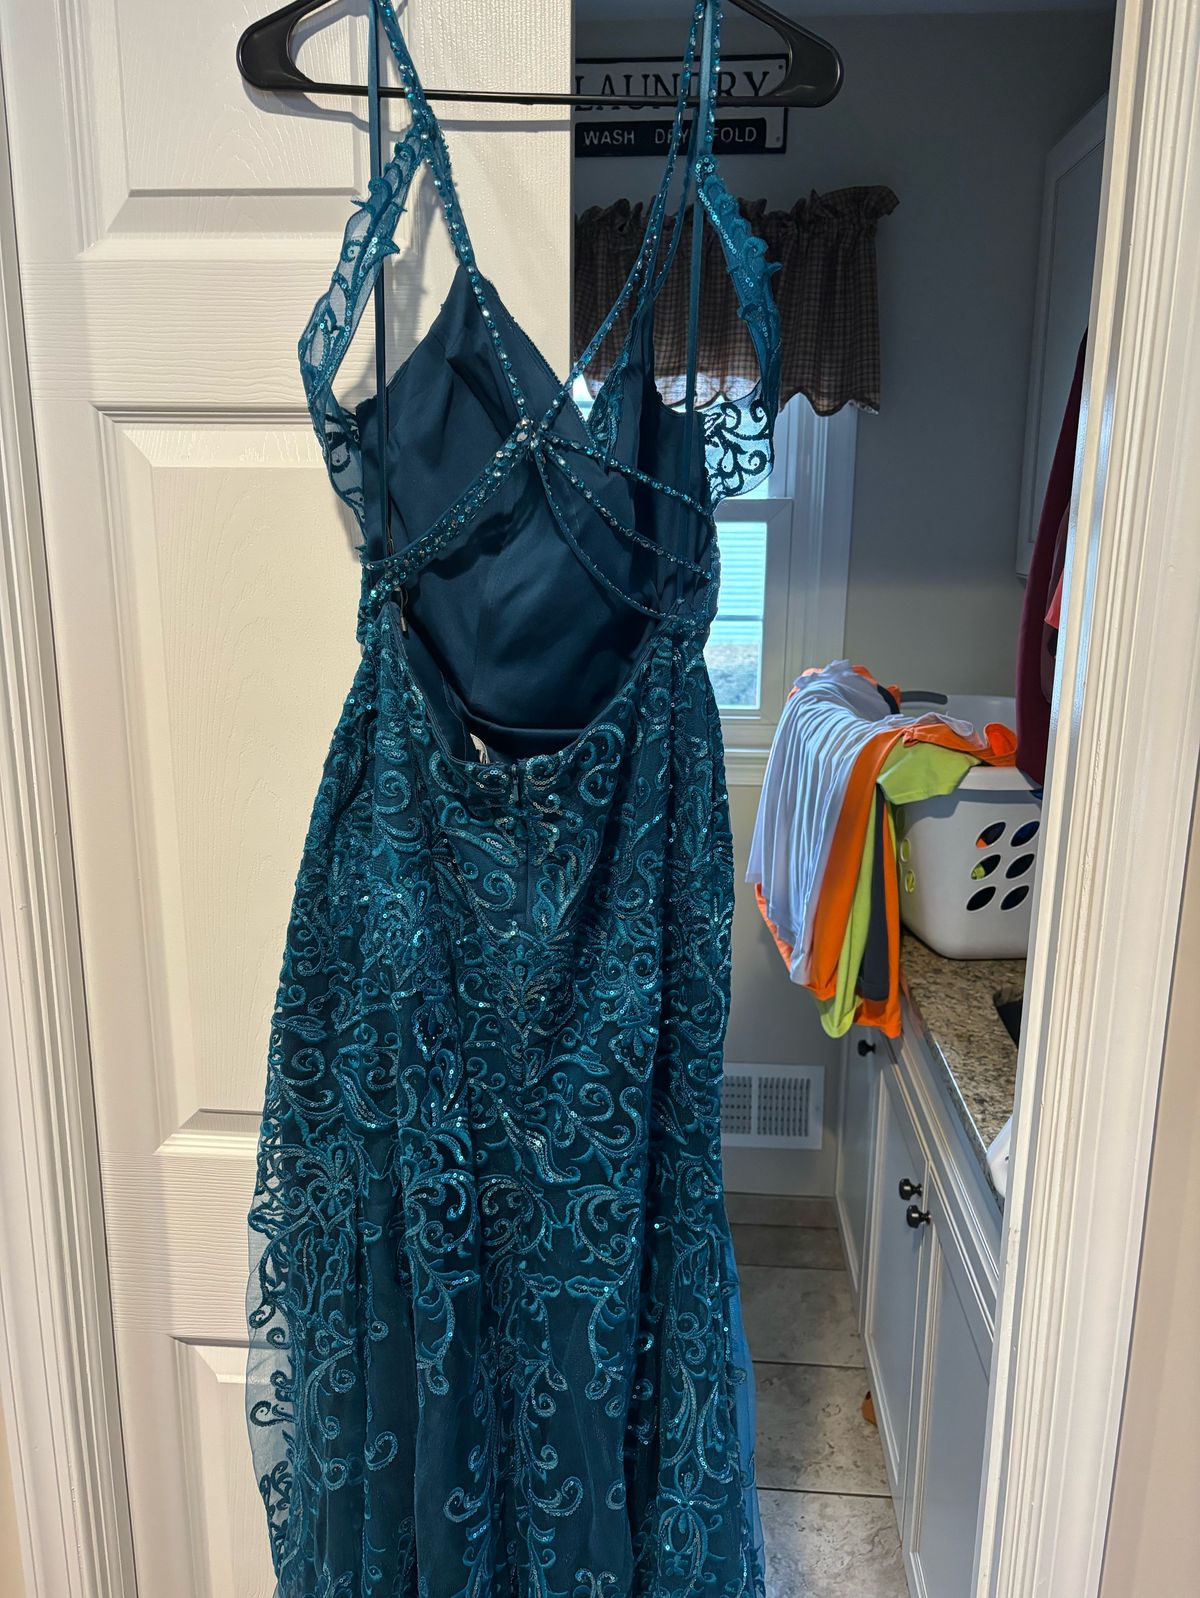 Size 10 Prom Plunge Blue A-line Dress on Queenly